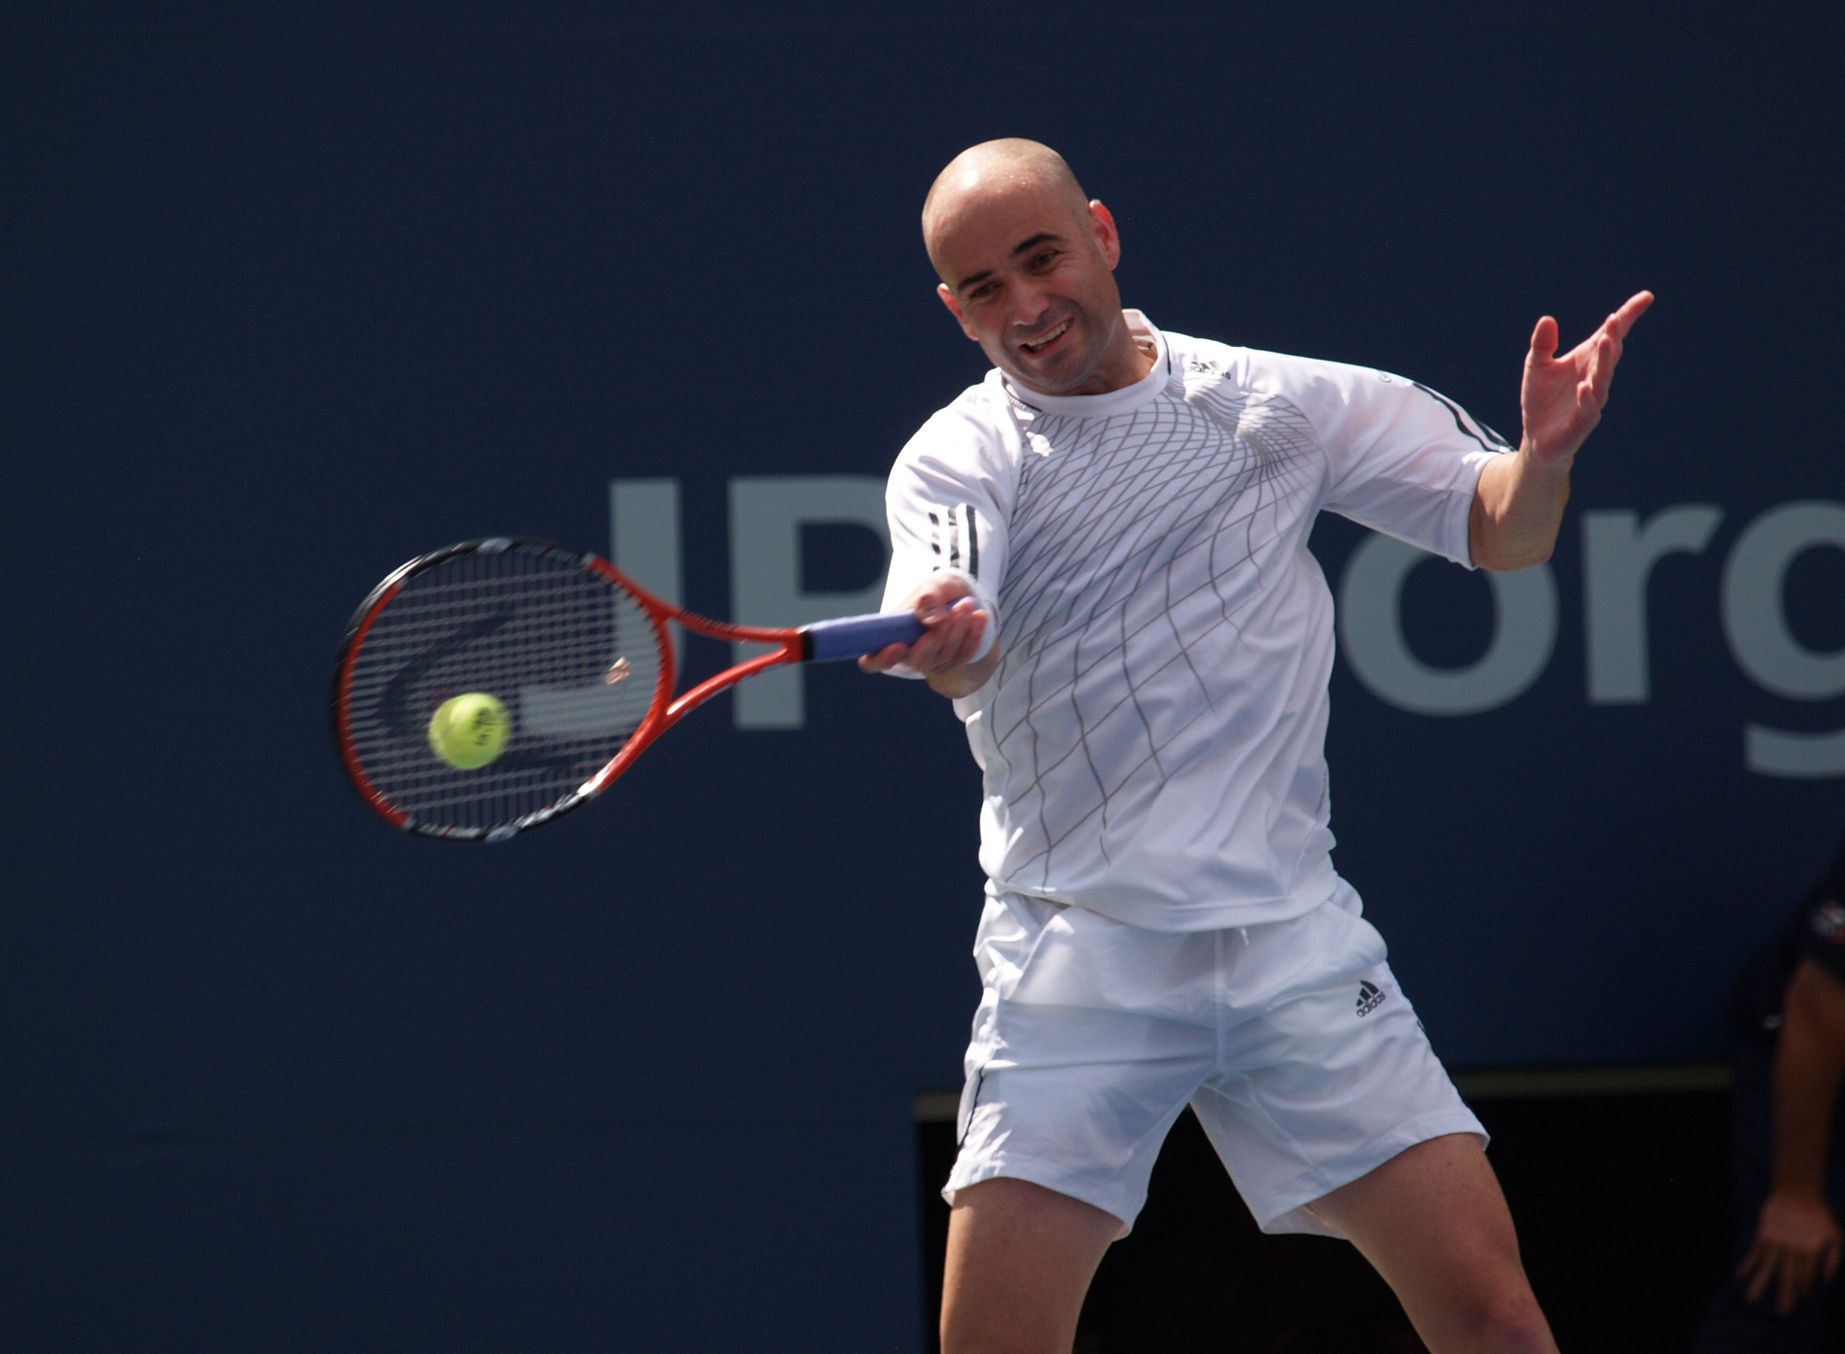 tennis, Andre Agassi,Stefani Graf, father's day